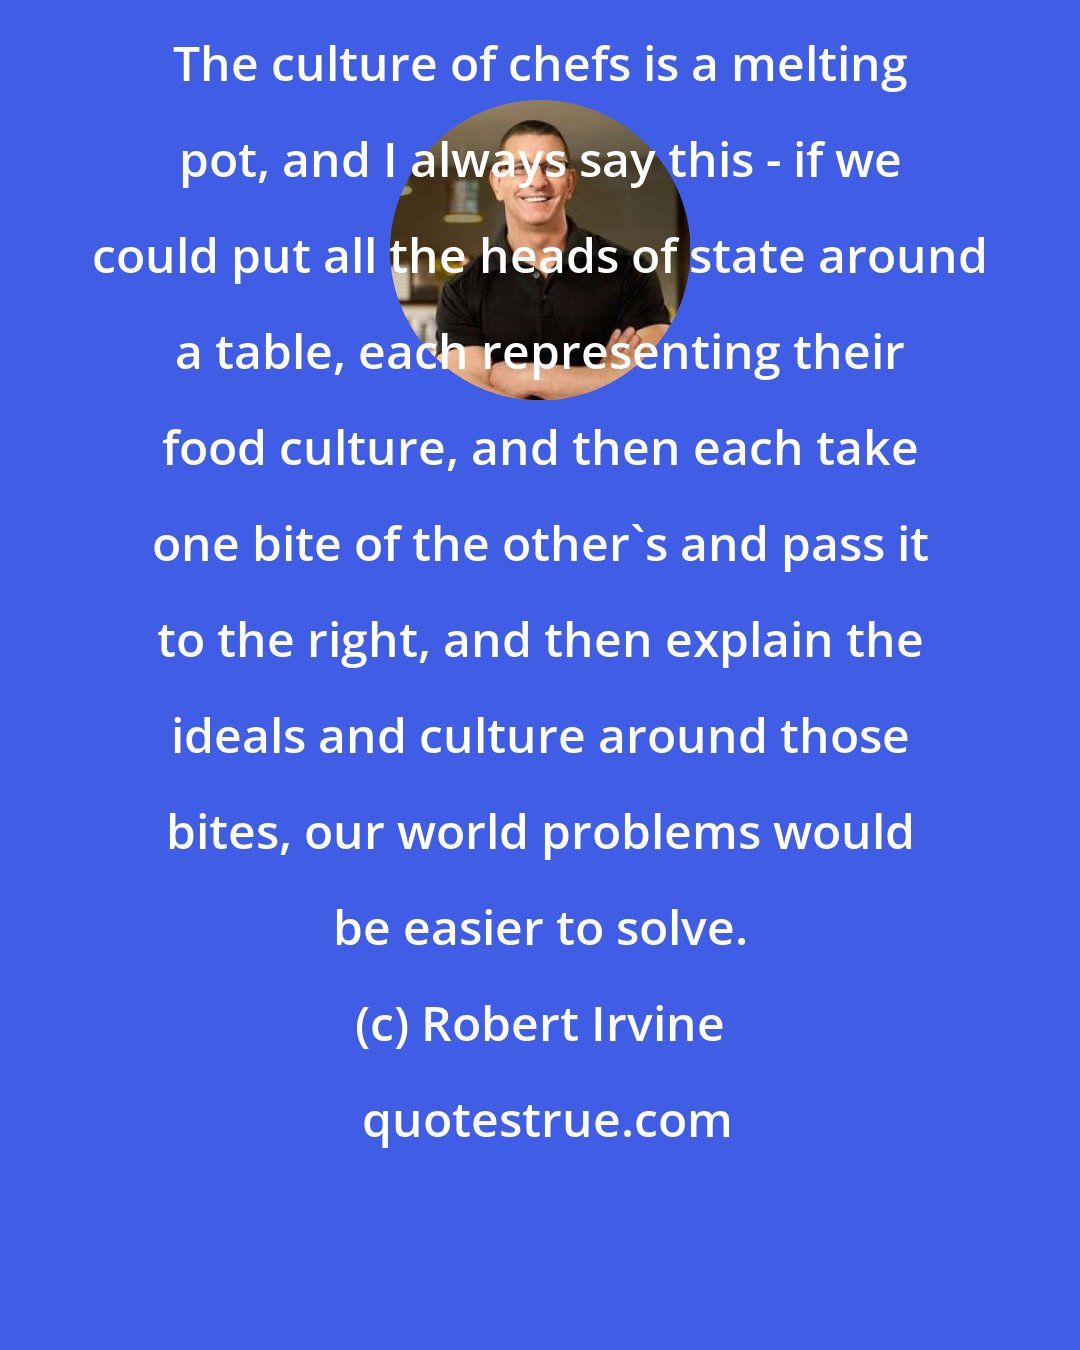 Robert Irvine: The culture of chefs is a melting pot, and I always say this - if we could put all the heads of state around a table, each representing their food culture, and then each take one bite of the other's and pass it to the right, and then explain the ideals and culture around those bites, our world problems would be easier to solve.